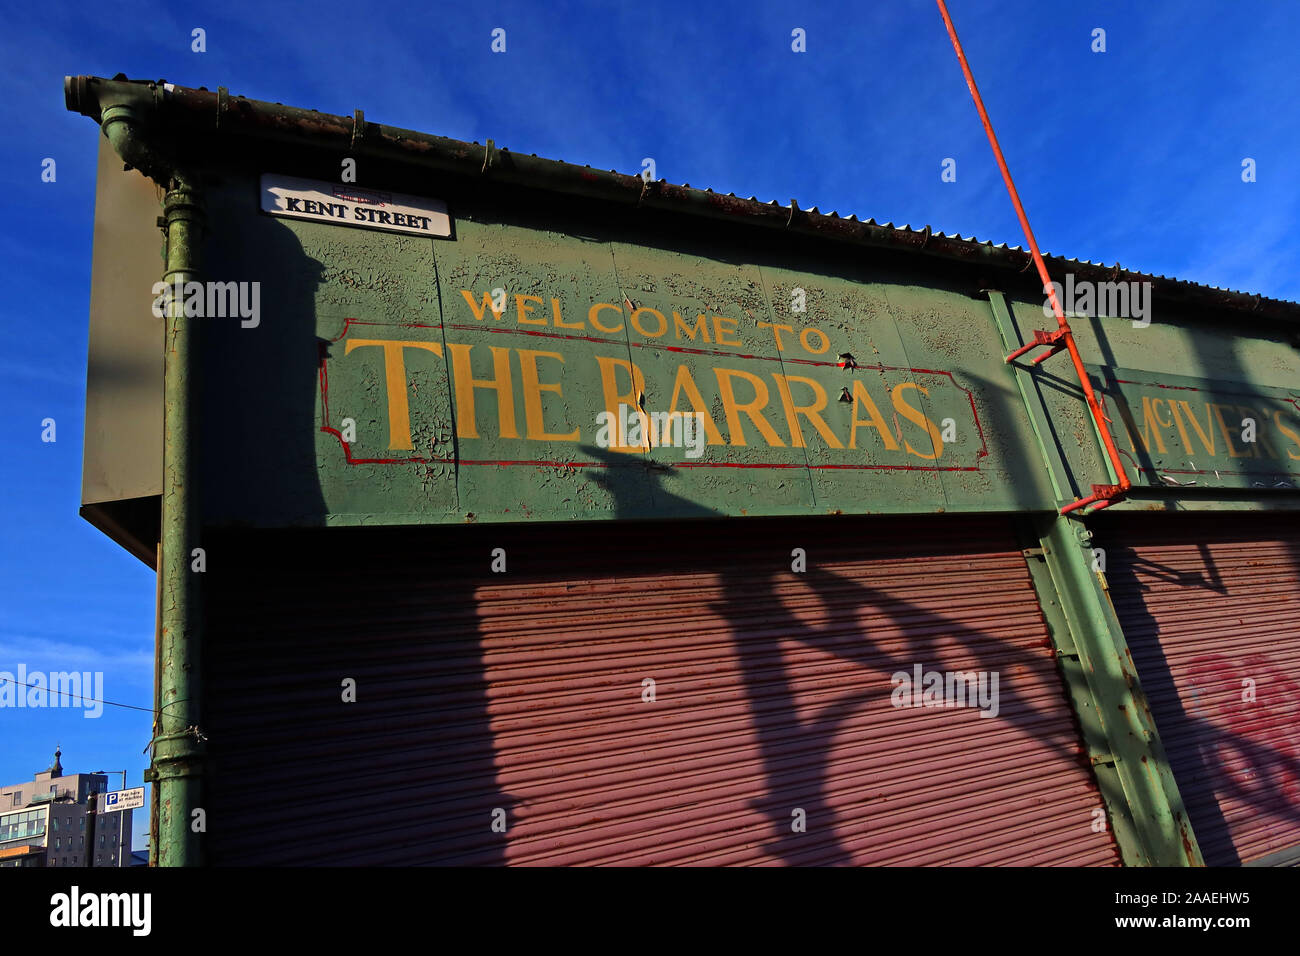 Welcome To The Barras sign, Gallowgate, East End, Glasgow, Scotland, UK, G1 5DX Stock Photo